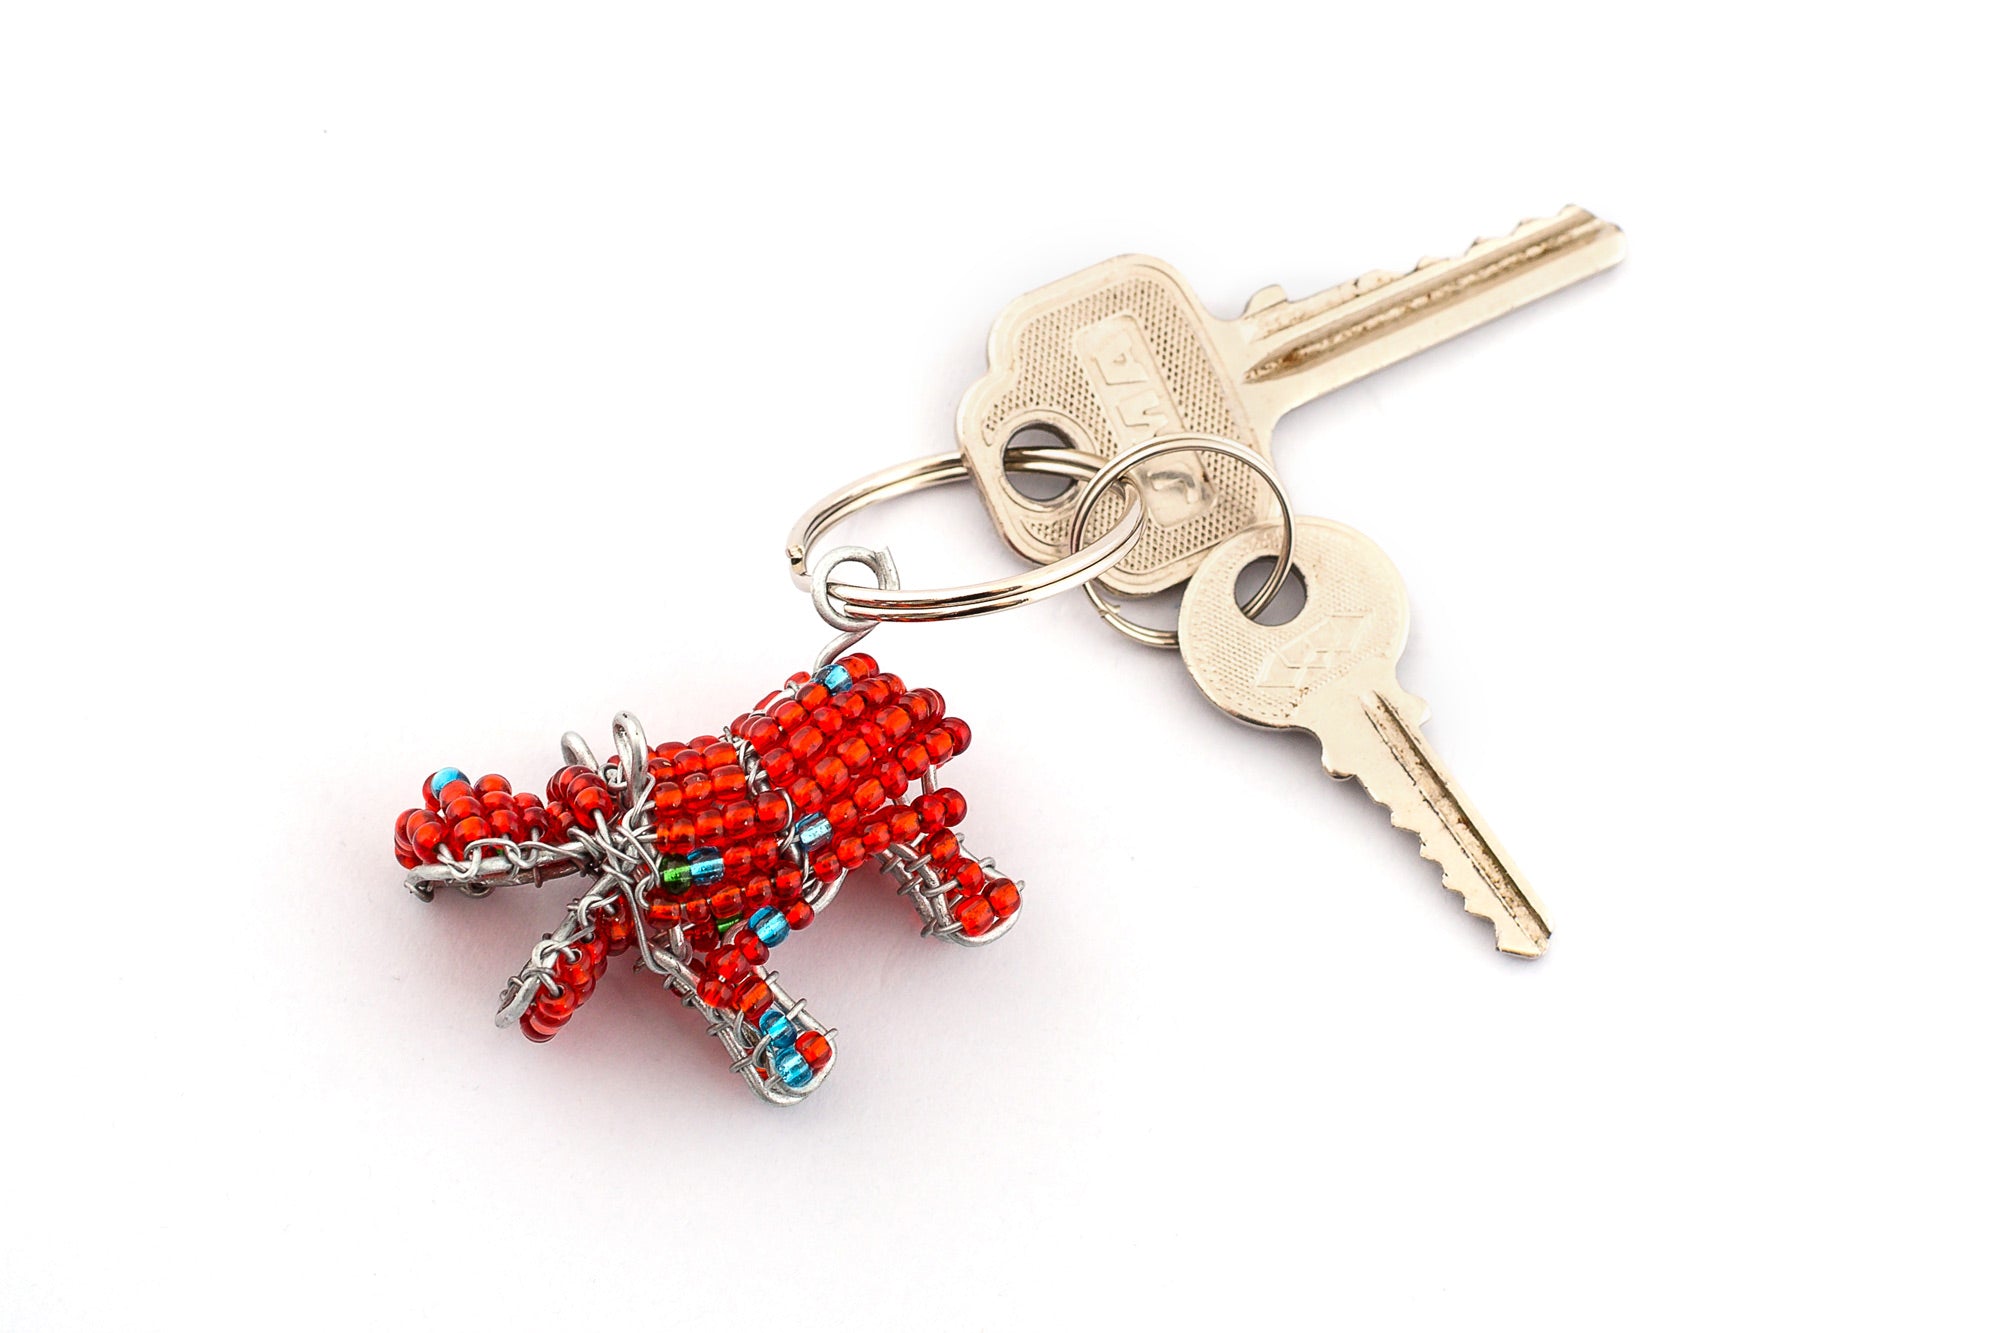 Beaded hippo key chain. Handmade in red beds with mouth wide open! So cute. Fair Trade products.